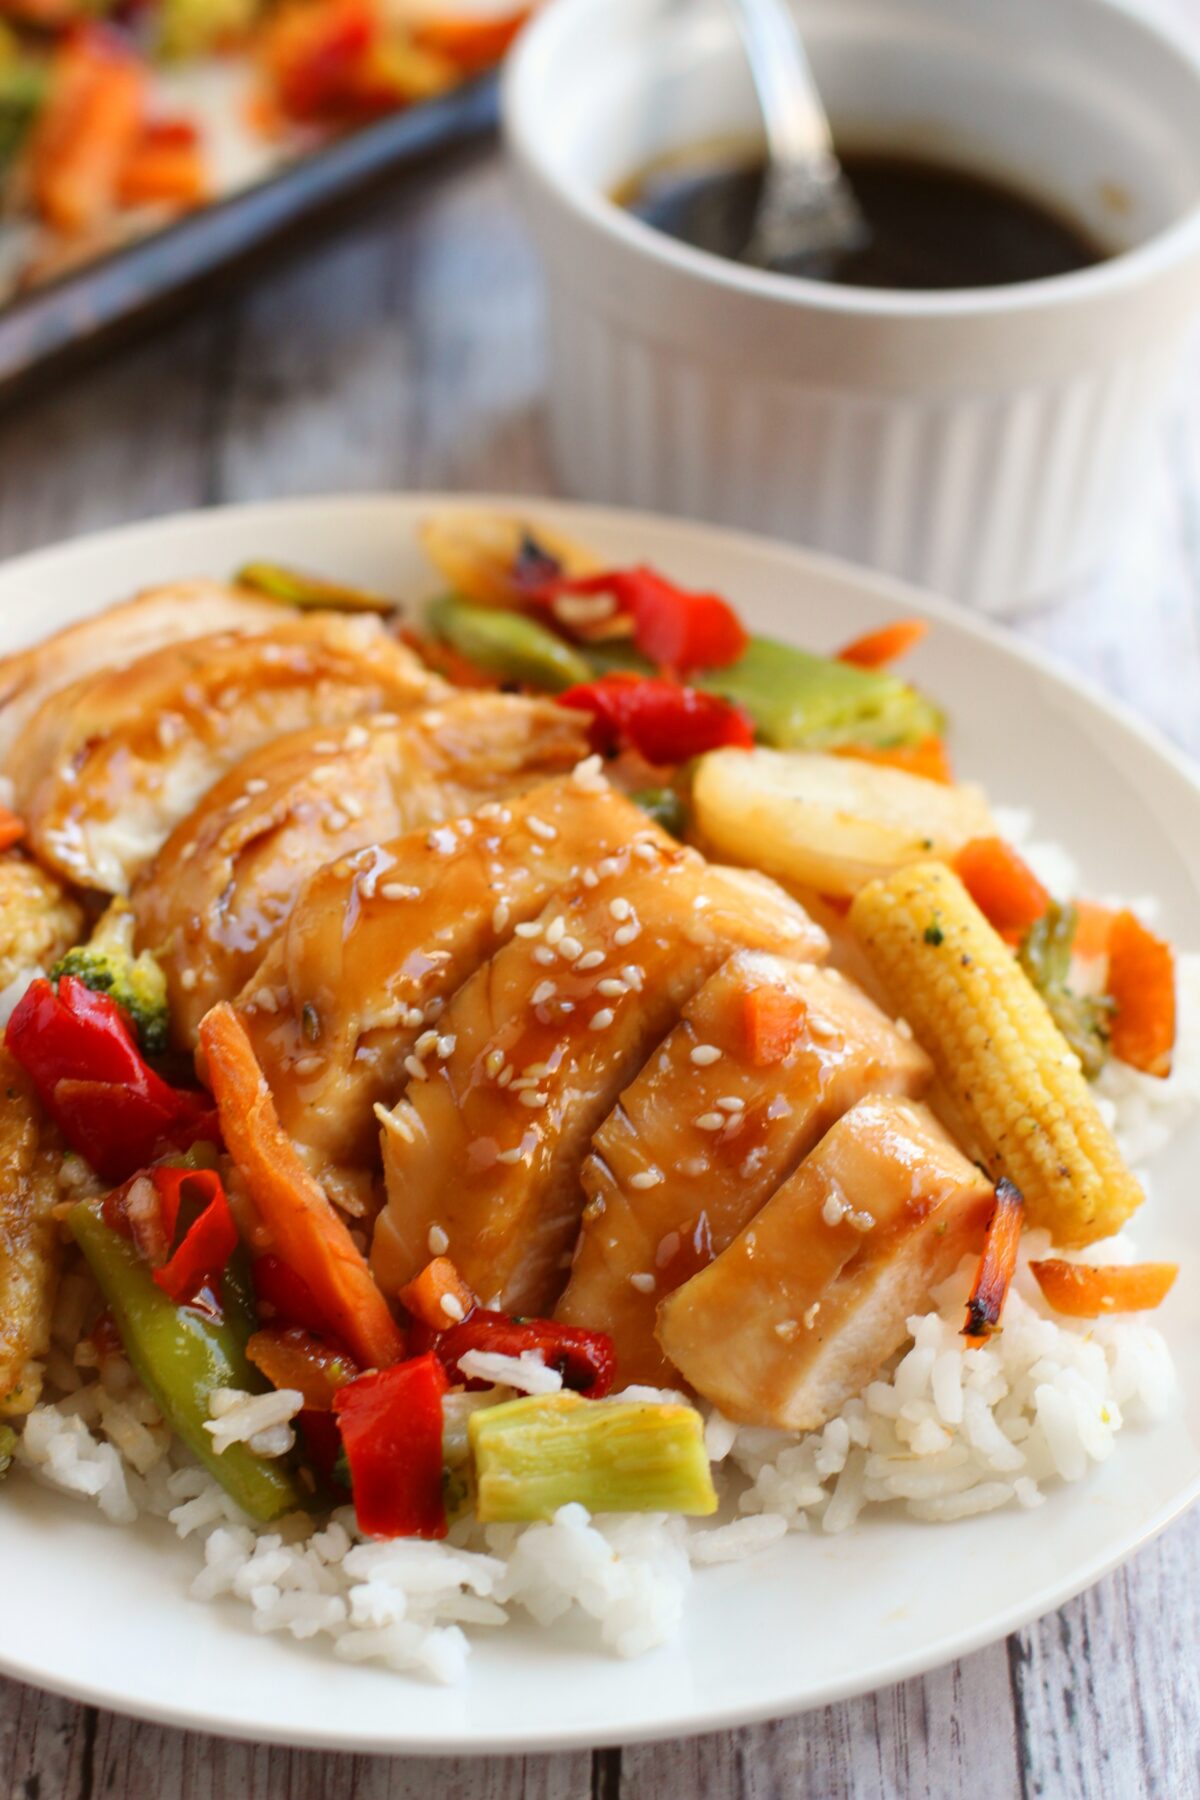 The best baked sheet pan chicken teriyaki recipe for busy weeknights! Full of juicy and tender chicken on a bed of sweet and tangy veggies!